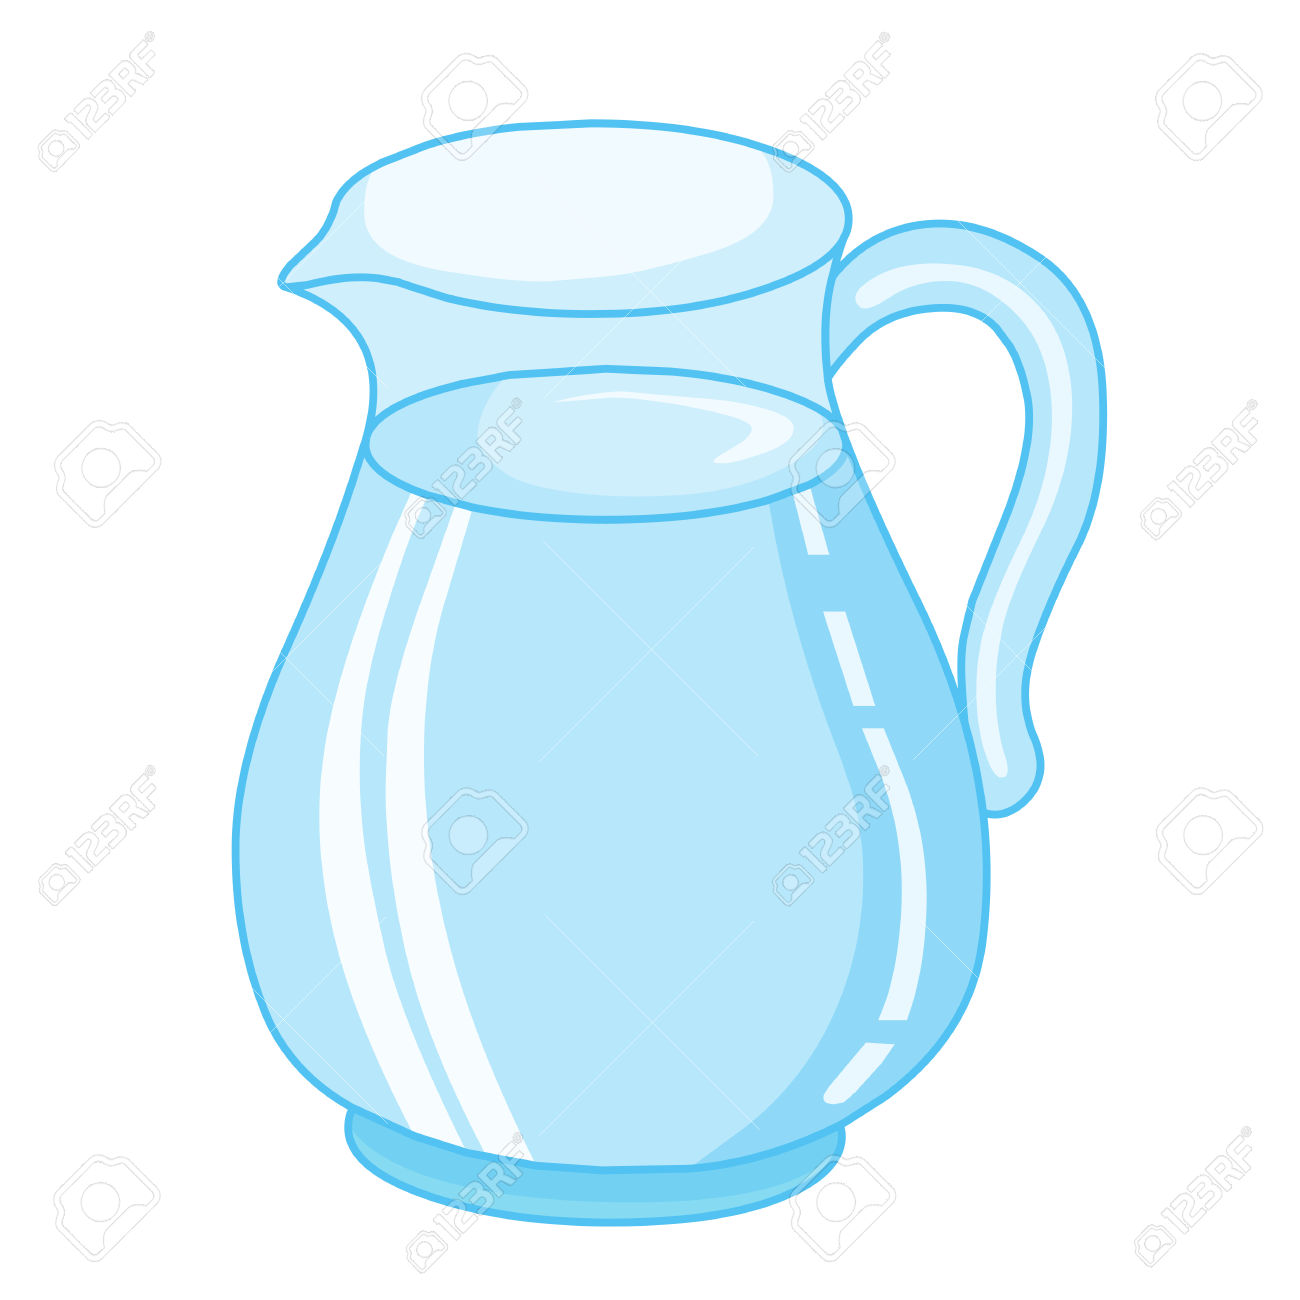 Pitcher water clipart.